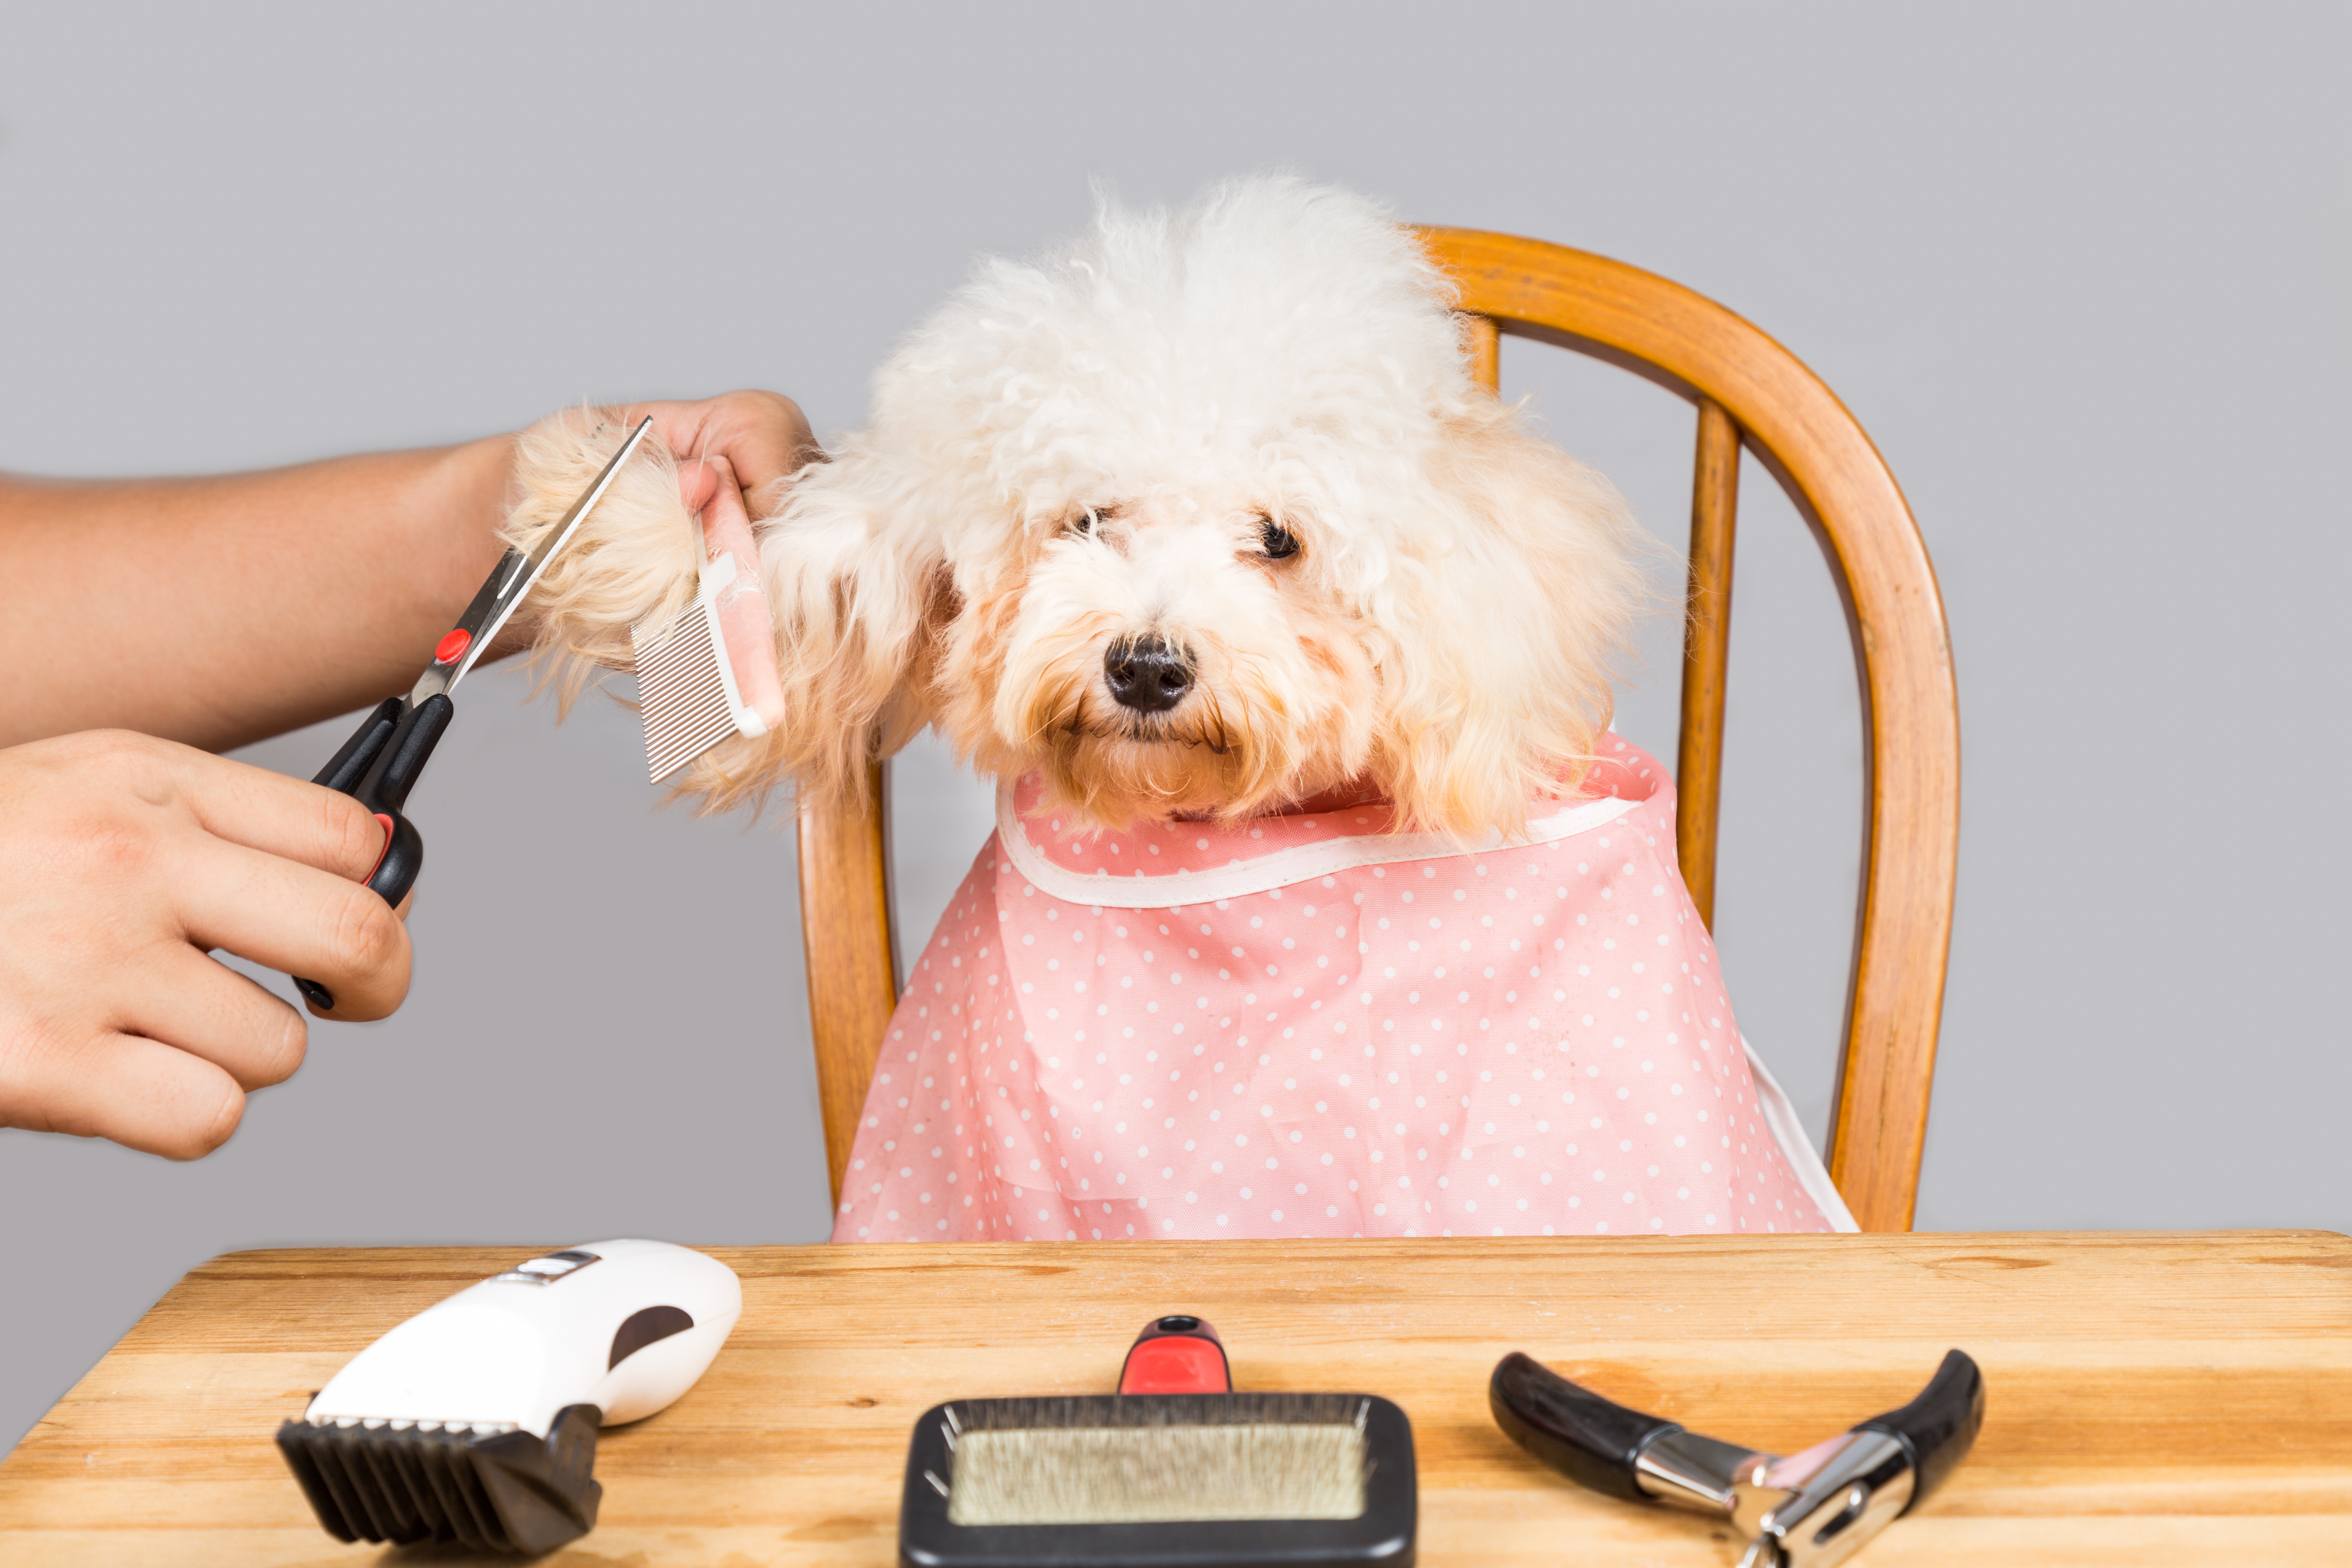 dog clippers for poodles